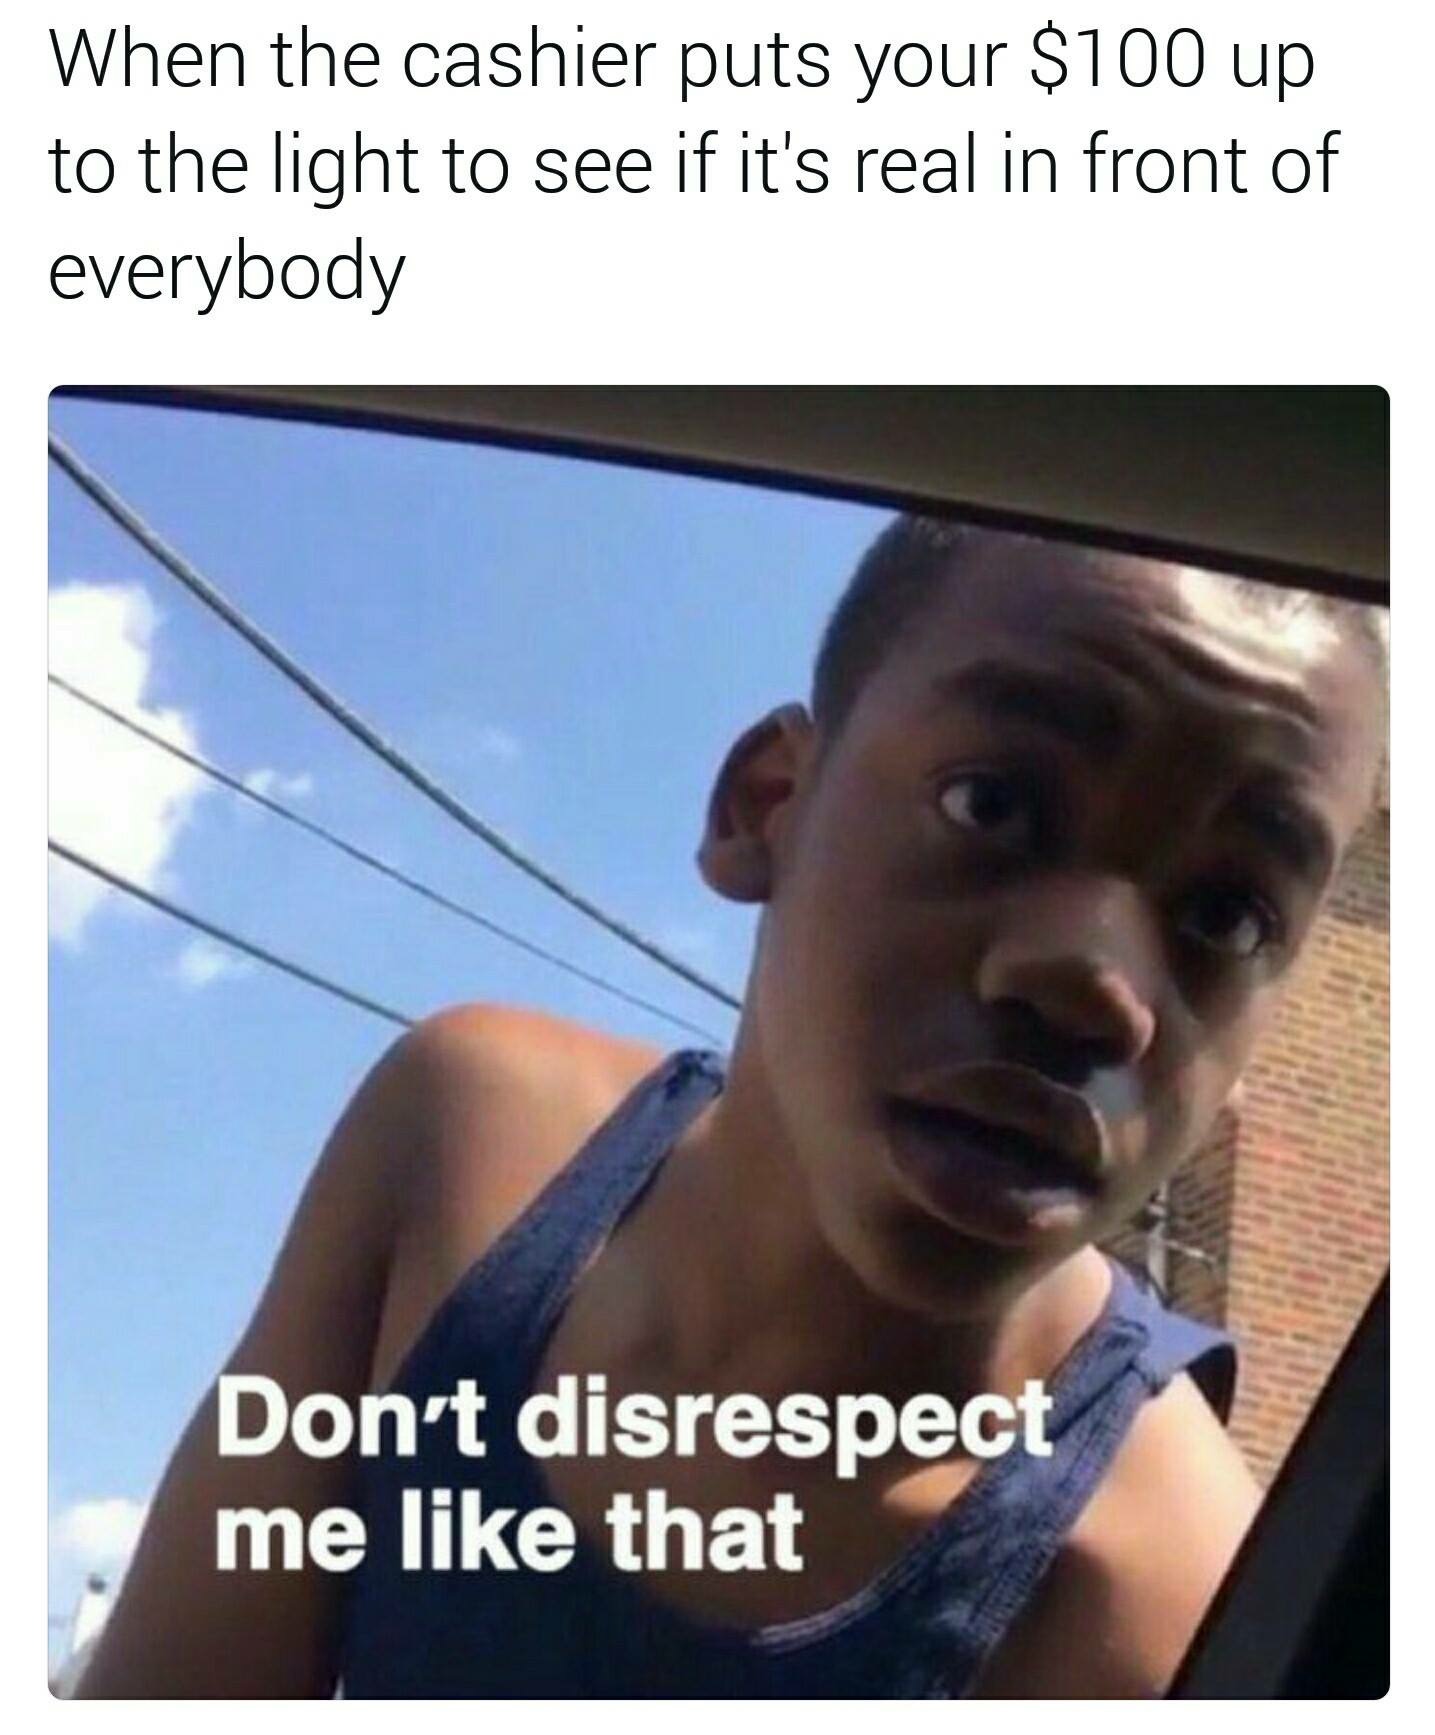 don t disrespect me like that meme - When the cashier puts your $100 up to the light to see if it's real in front of everybody Don't disrespect me that